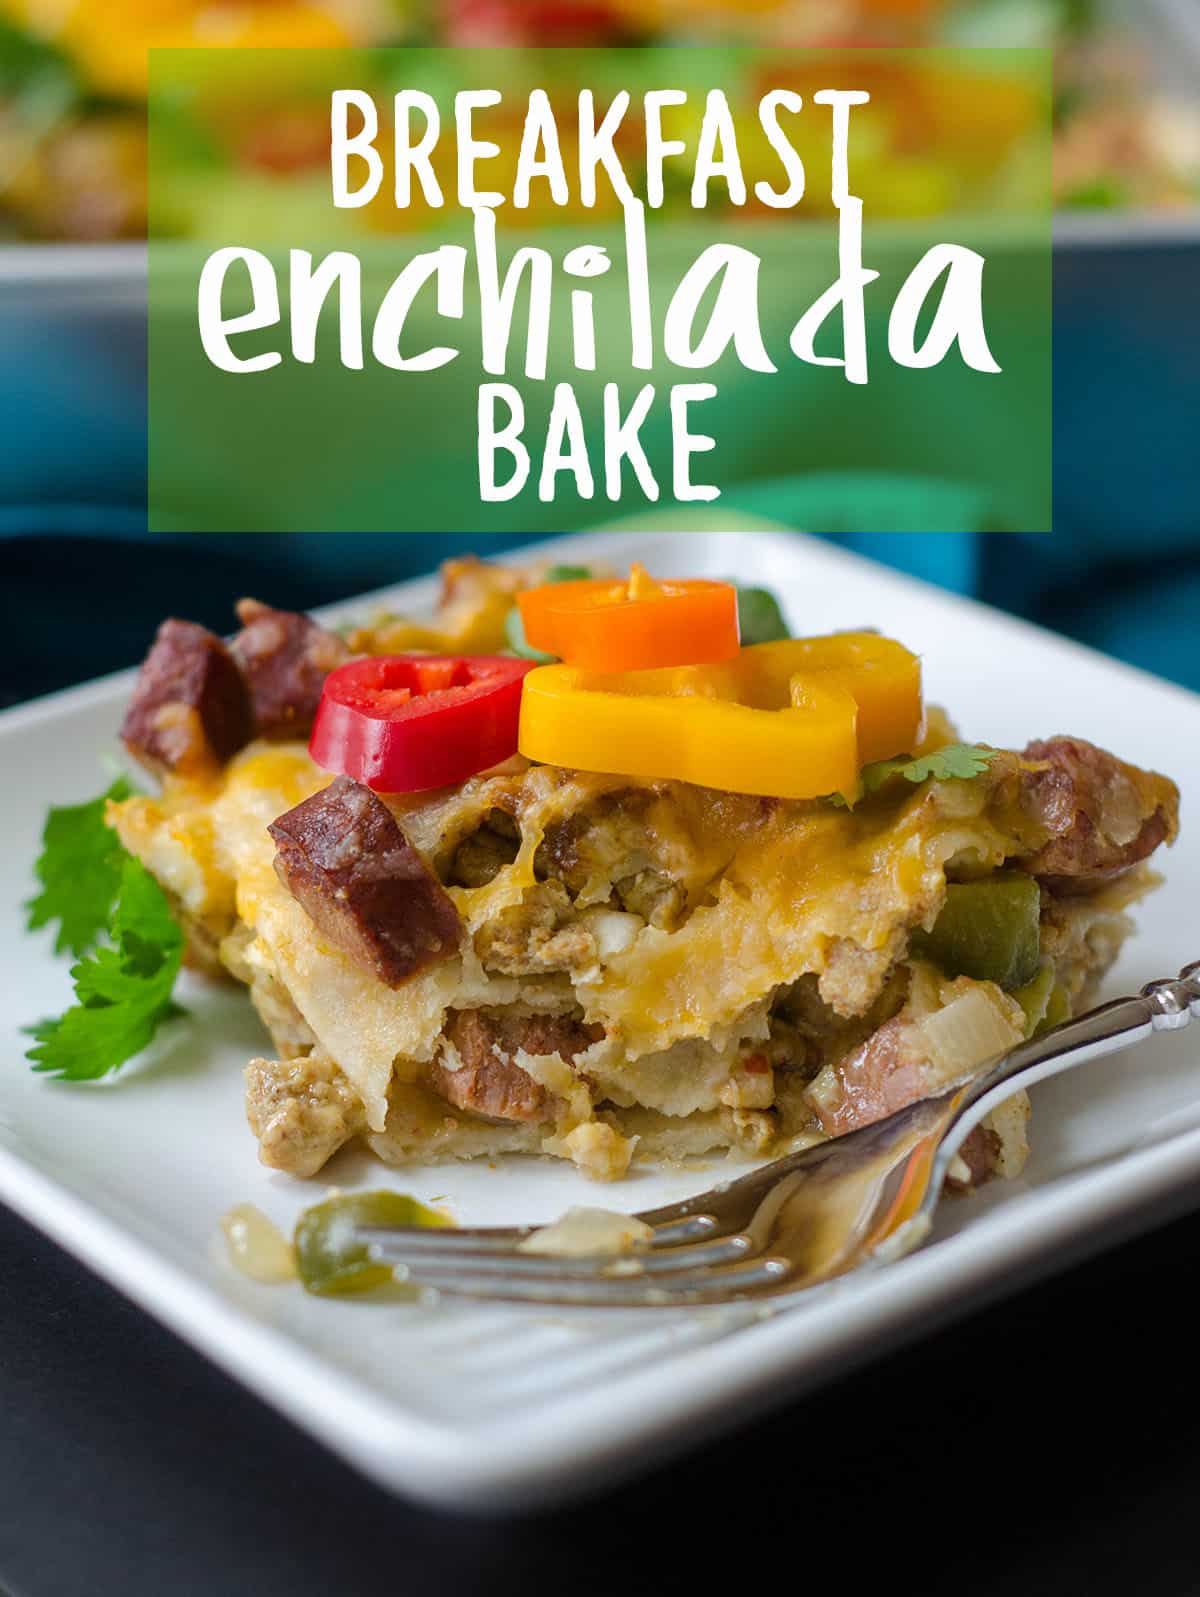 Enchilada Breakfast Bake: Seasoned scrambled eggs and vegetables combined with spicy chorizo, and layered between corn tortillas and enchilada sauce for an easy and flavorful breakfast dish. via @frshaprilflours